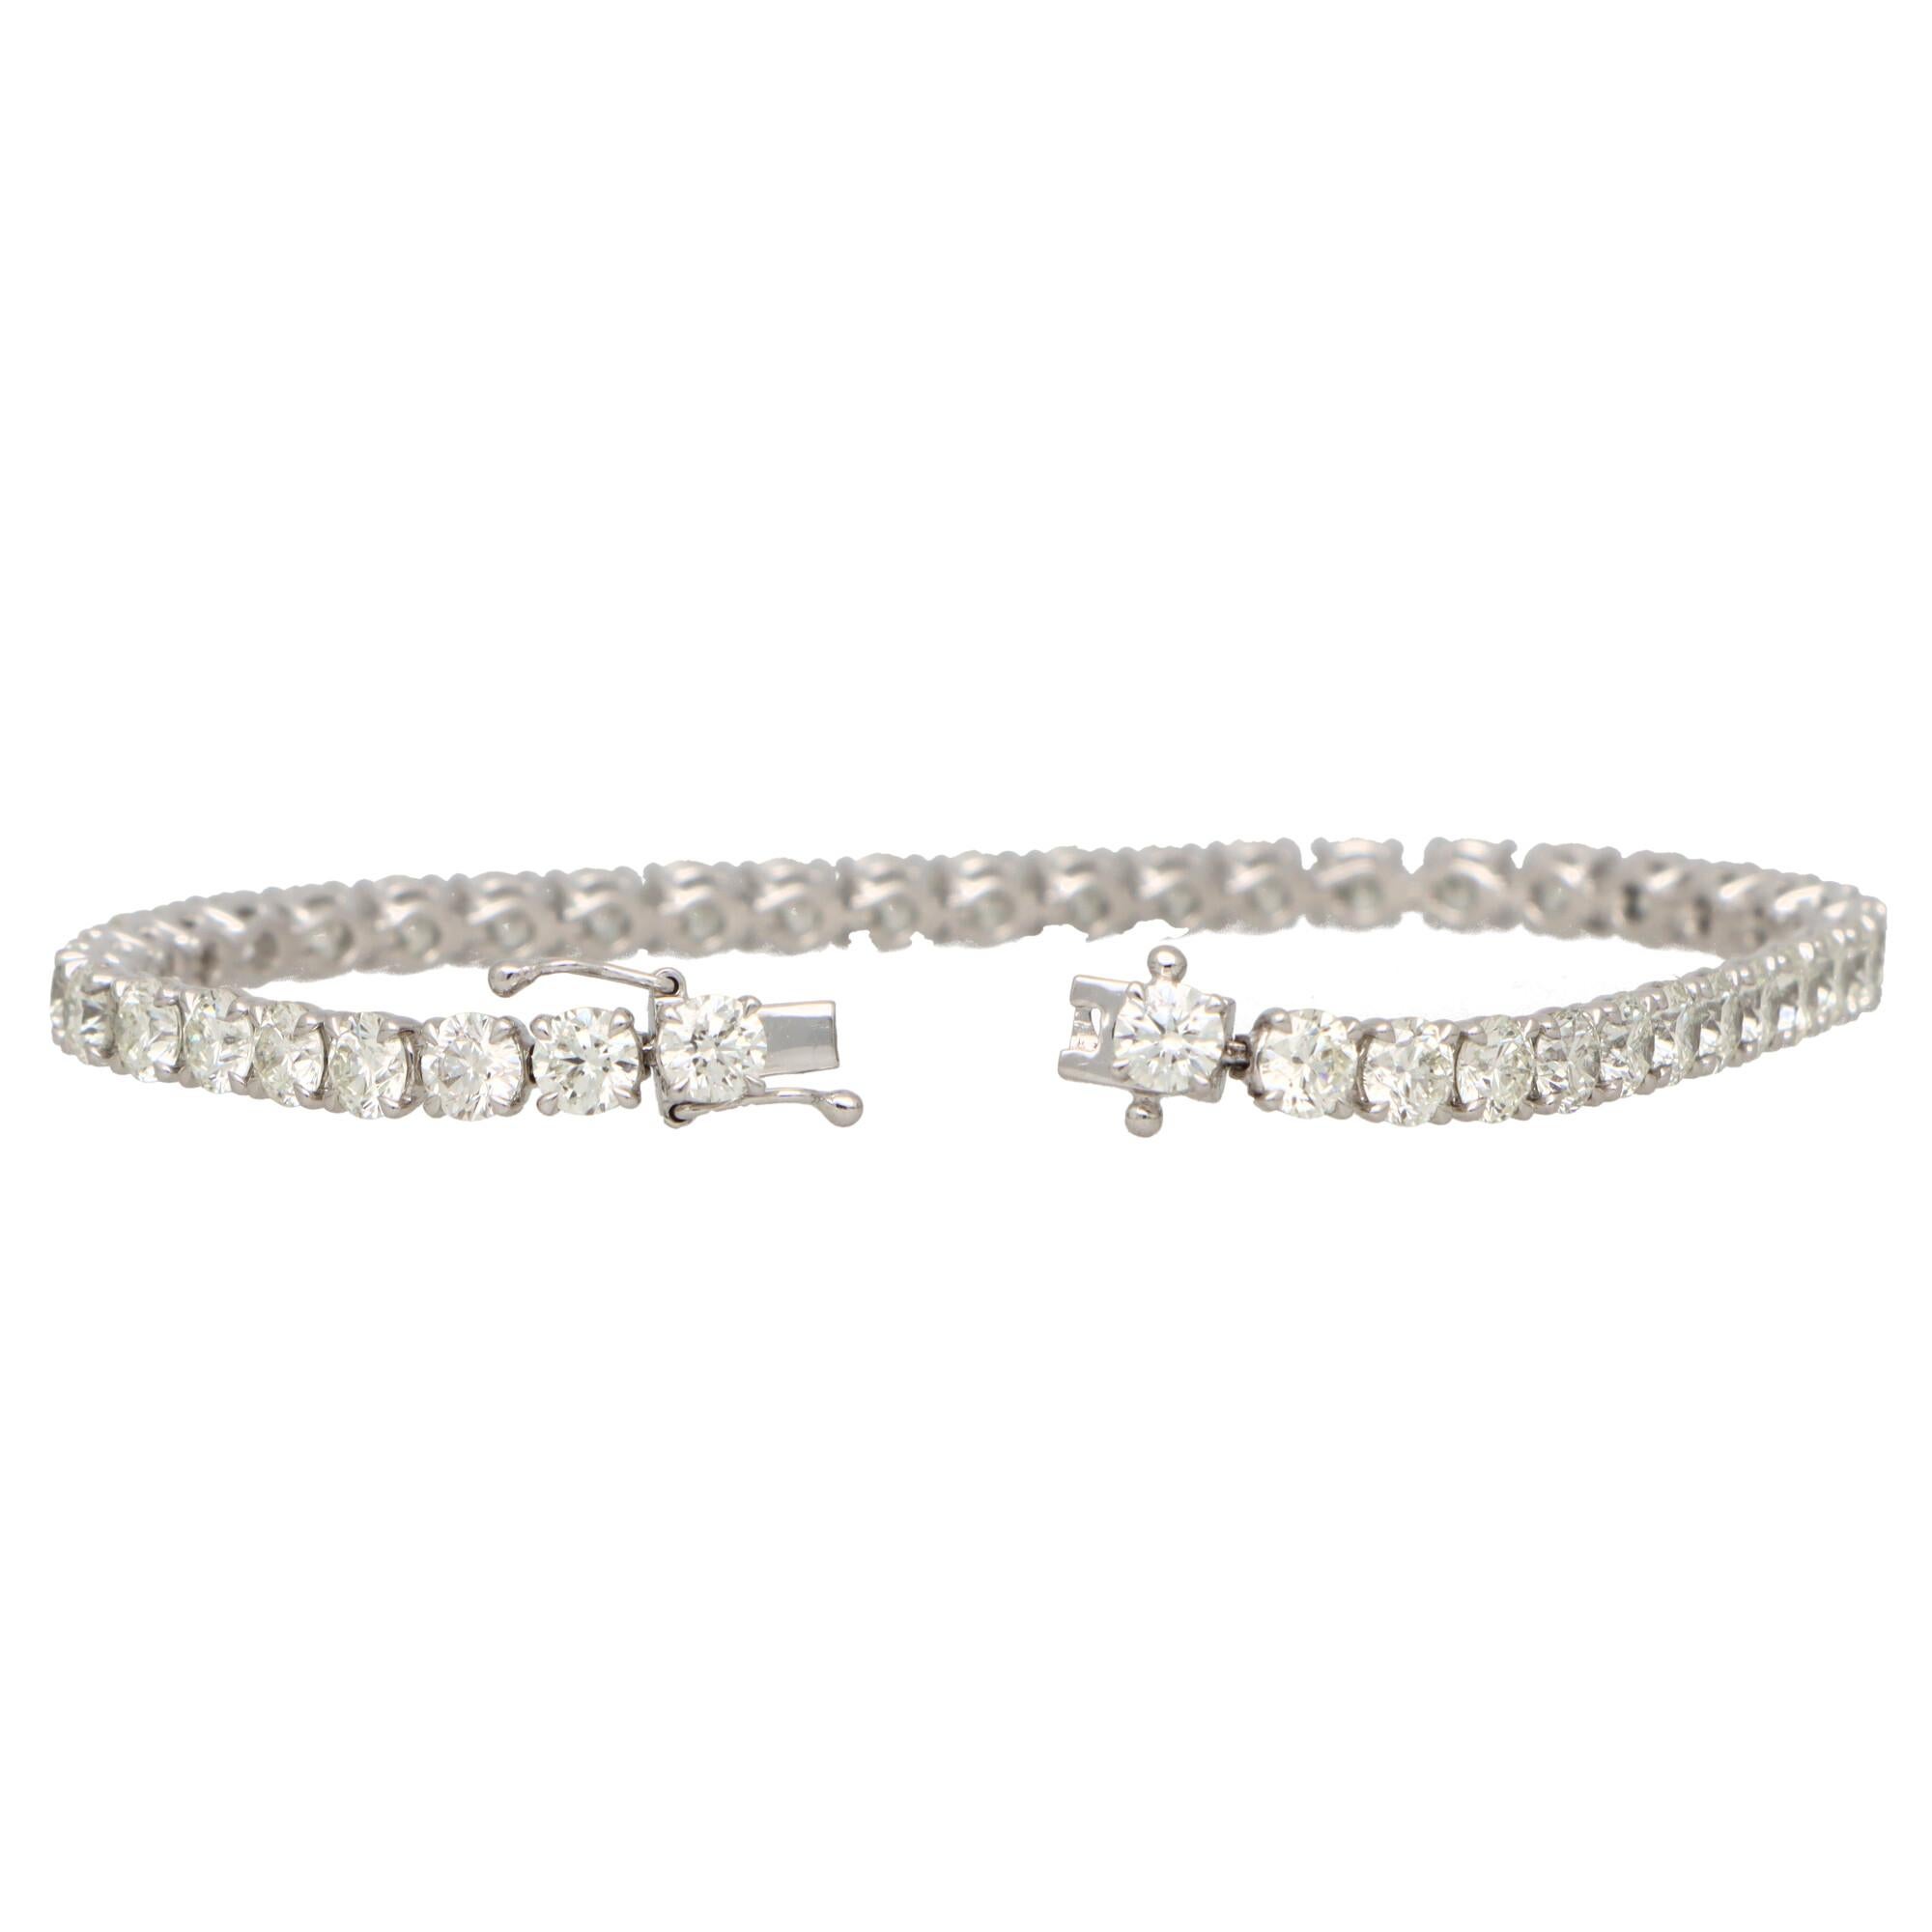  A lovely contemporary diamond line bracelet set in 18k white gold.

The bracelet is composed of a grand total of 44 round brilliant cut sparkly diamonds, all of which are claw set securely. 

Due to the links being articulated, this allows the